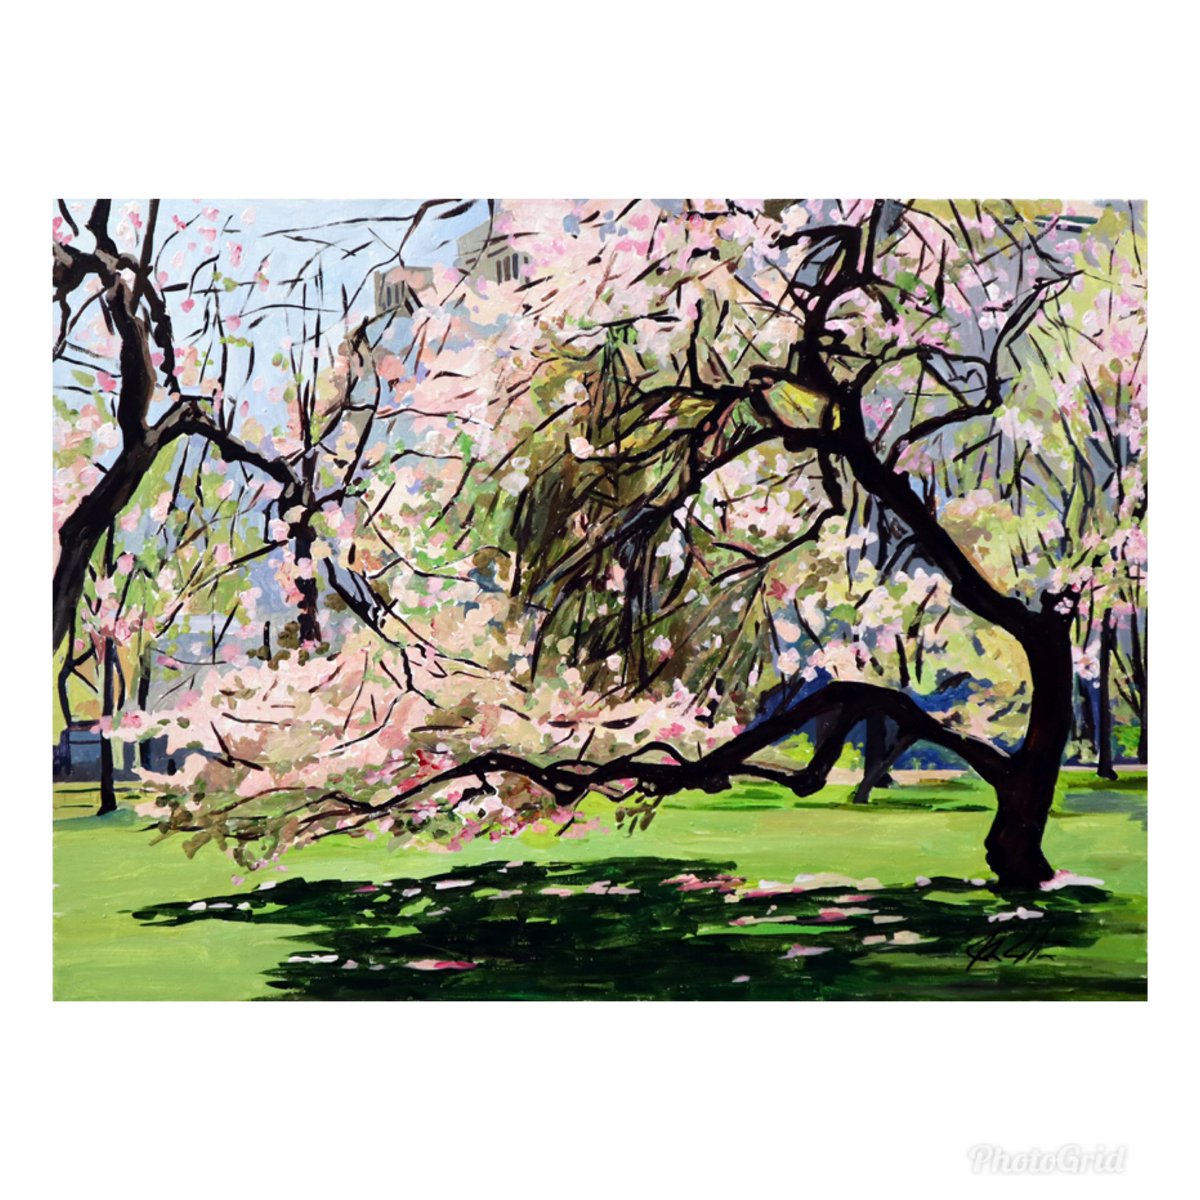 New painting. “Spring in Central Park”. 22” x 30” acrylic on canvas. It’s available. #art #artgallery #painting #nyc @centralparknyc #centralpark #springinnyc #trees